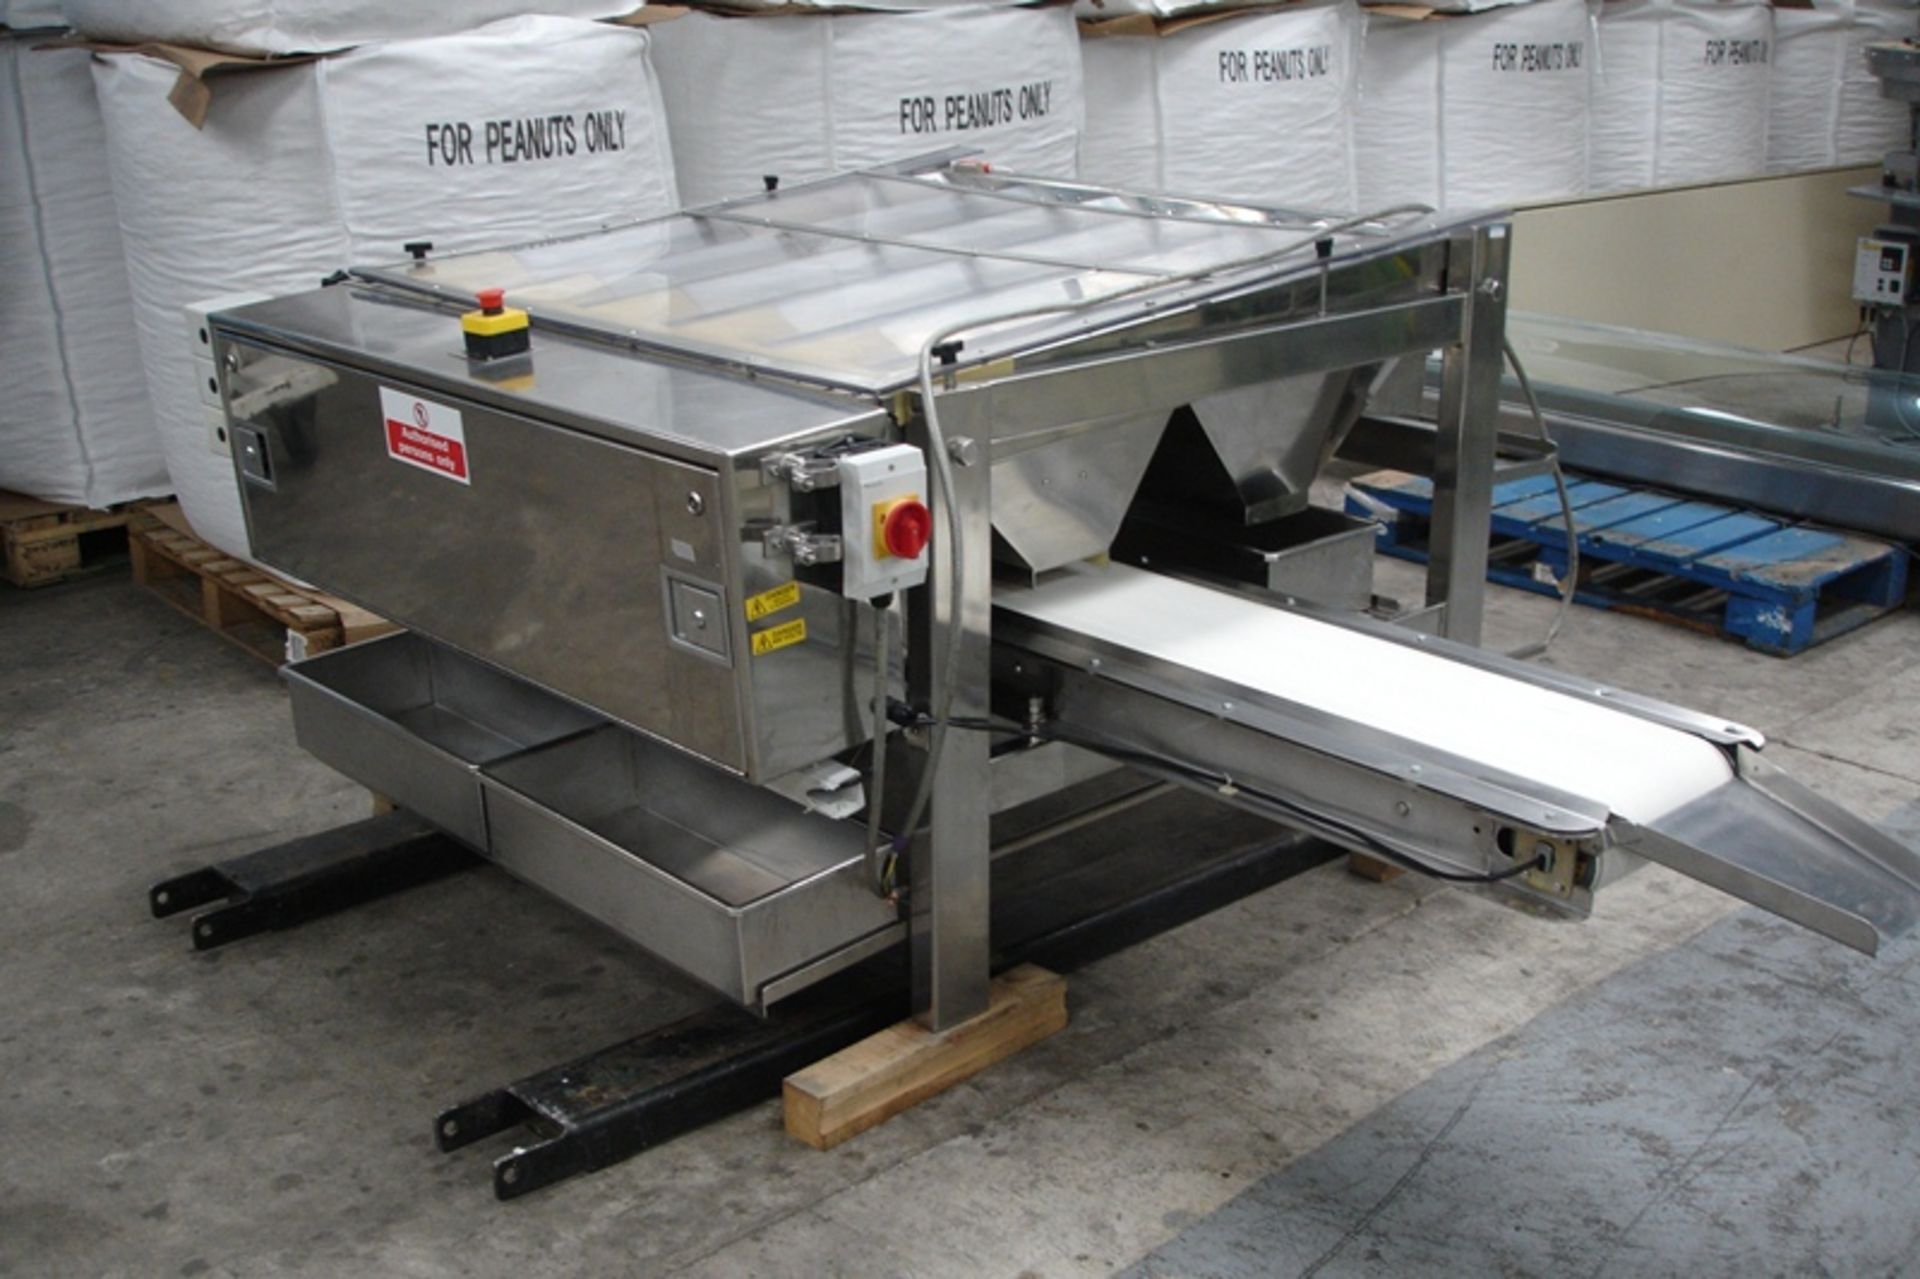 Fully Stainless Steel food grade 5 Lane Sizing / Grading Machine with Outfeed - Image 7 of 7